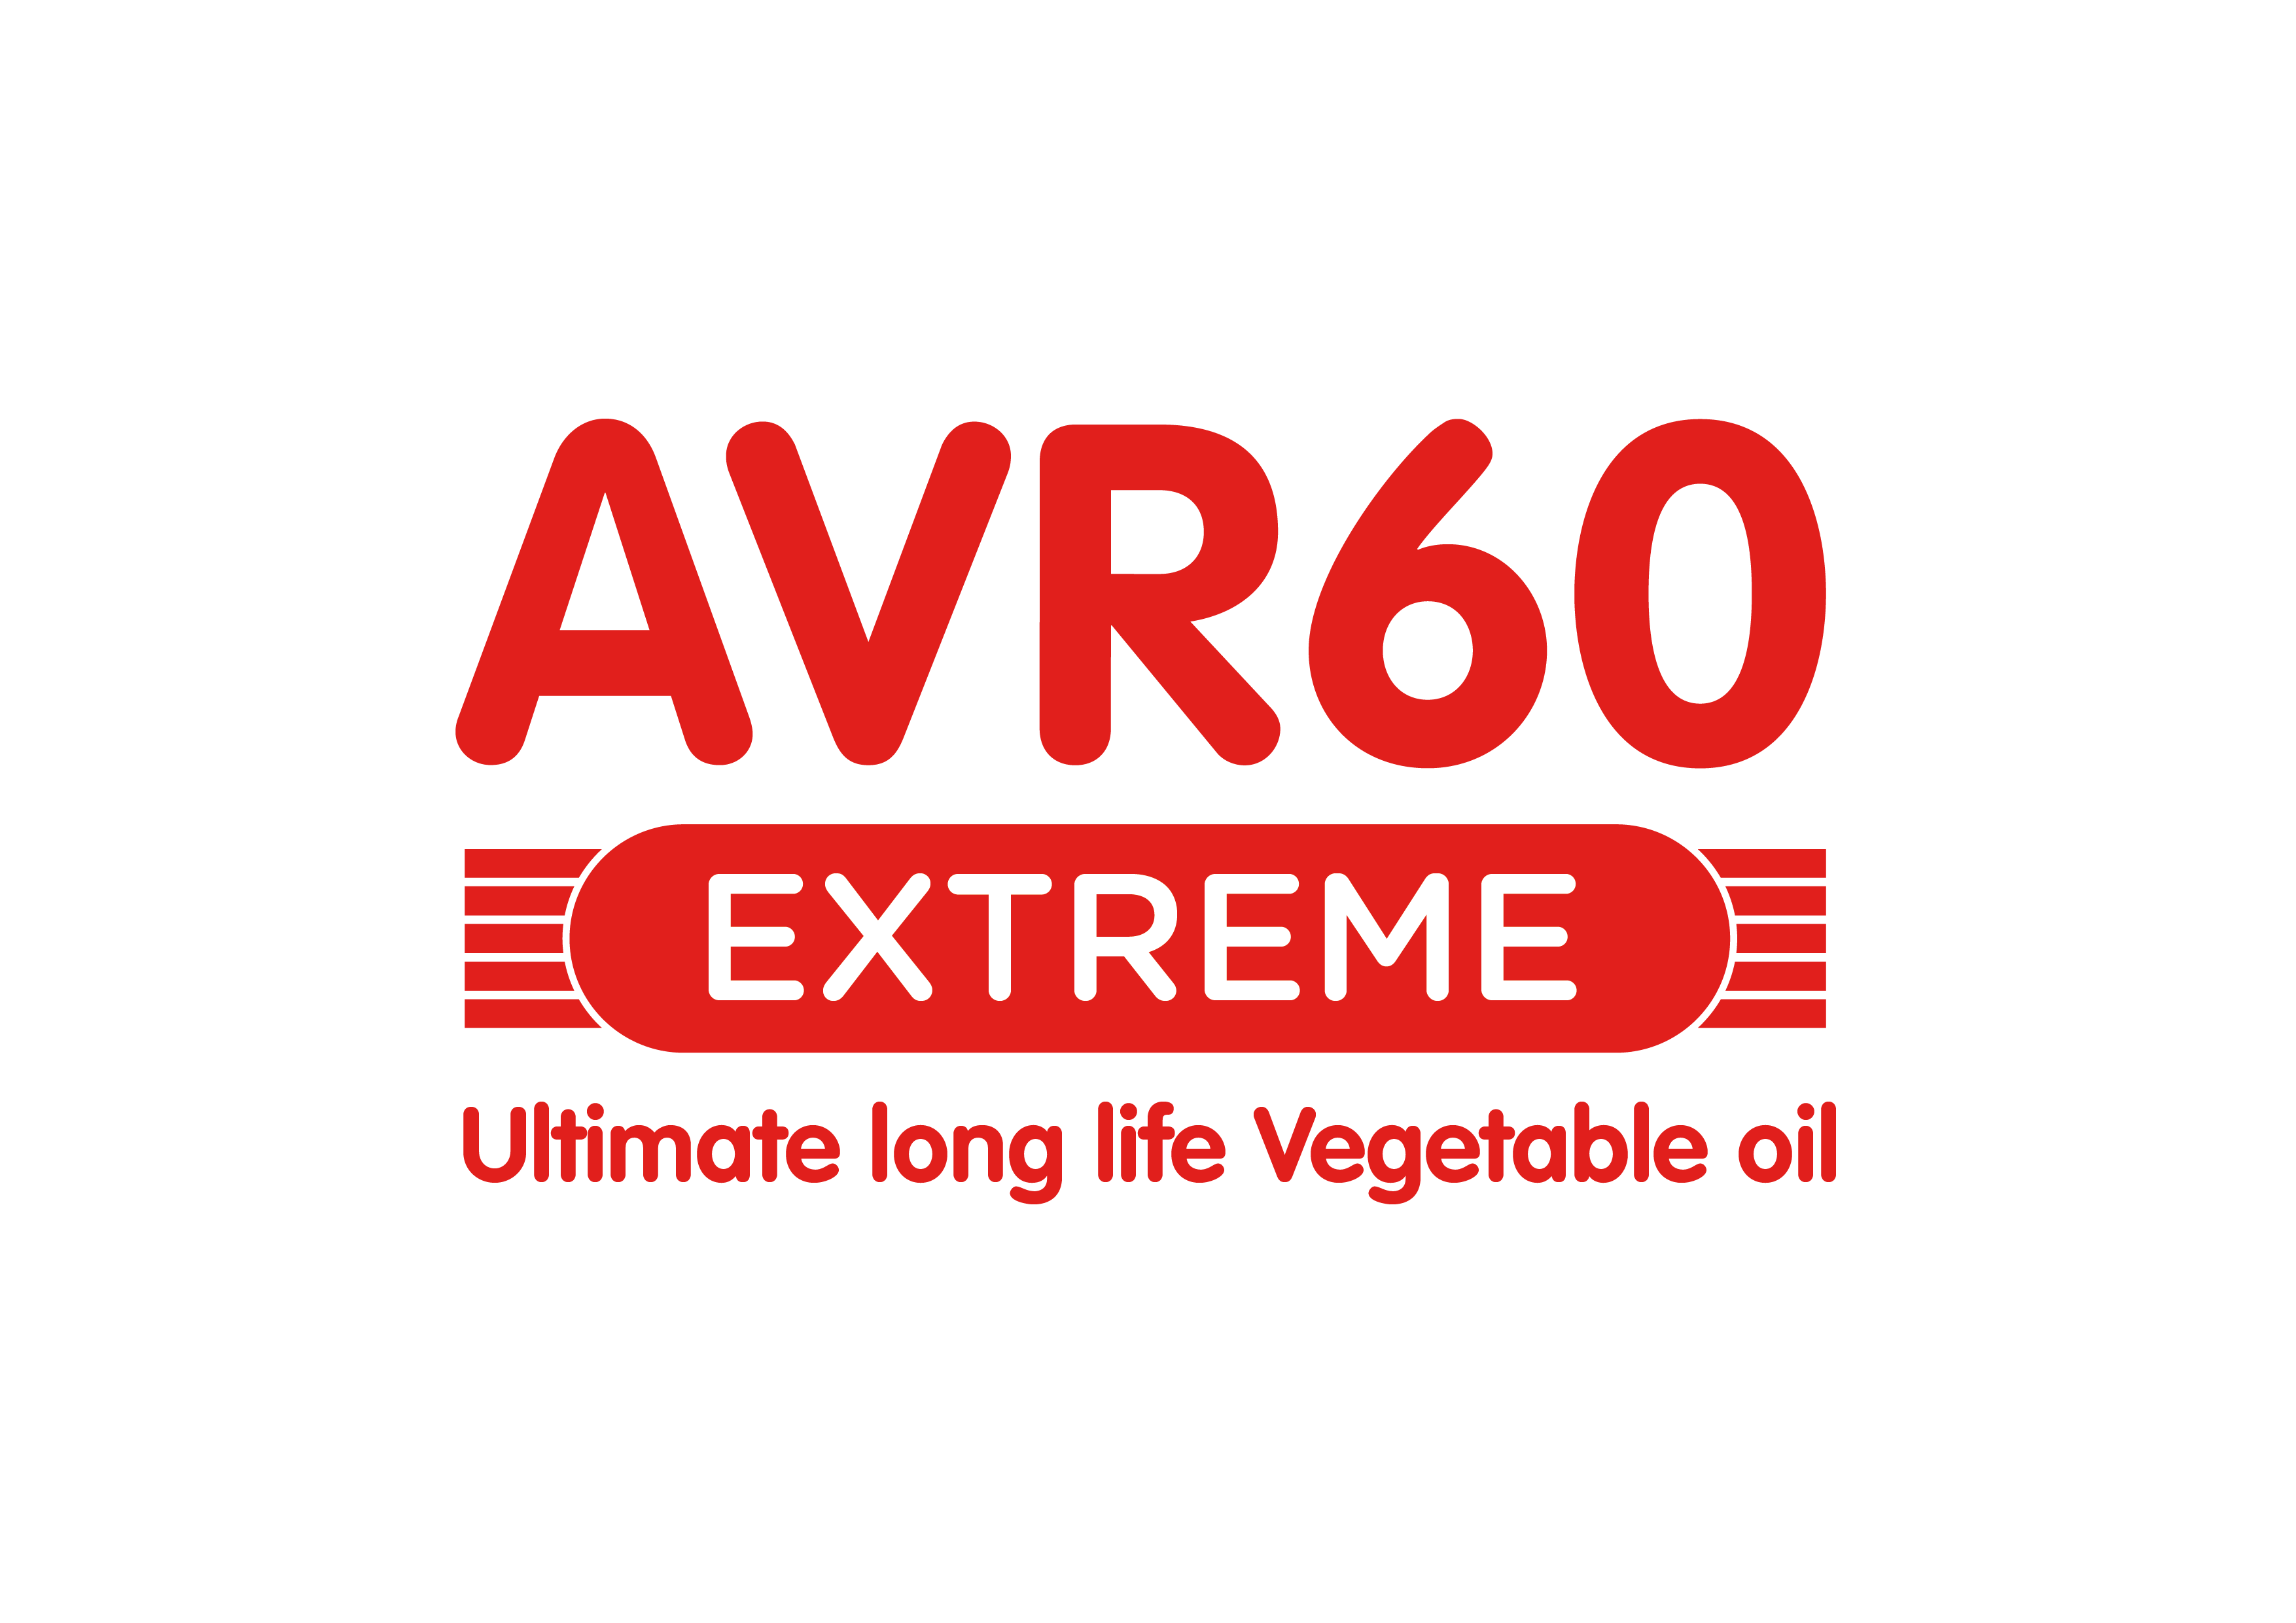 AAK FS AVR60 Extreme logo Red on Clear